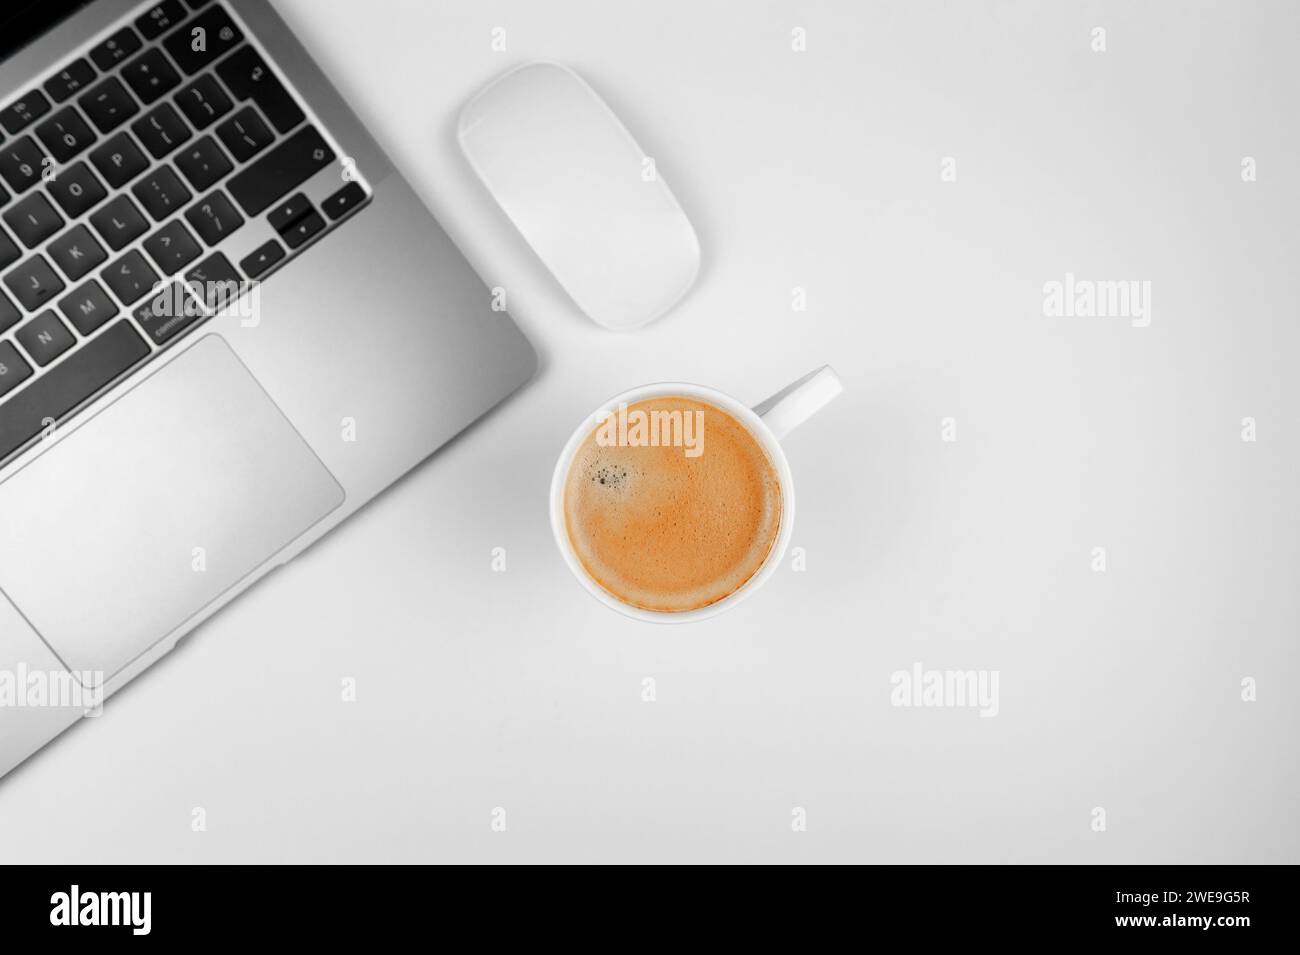 Top view of grey laptop computer on white background. Coffee cup, white mouse, flat lay, copy space. Stock Photo